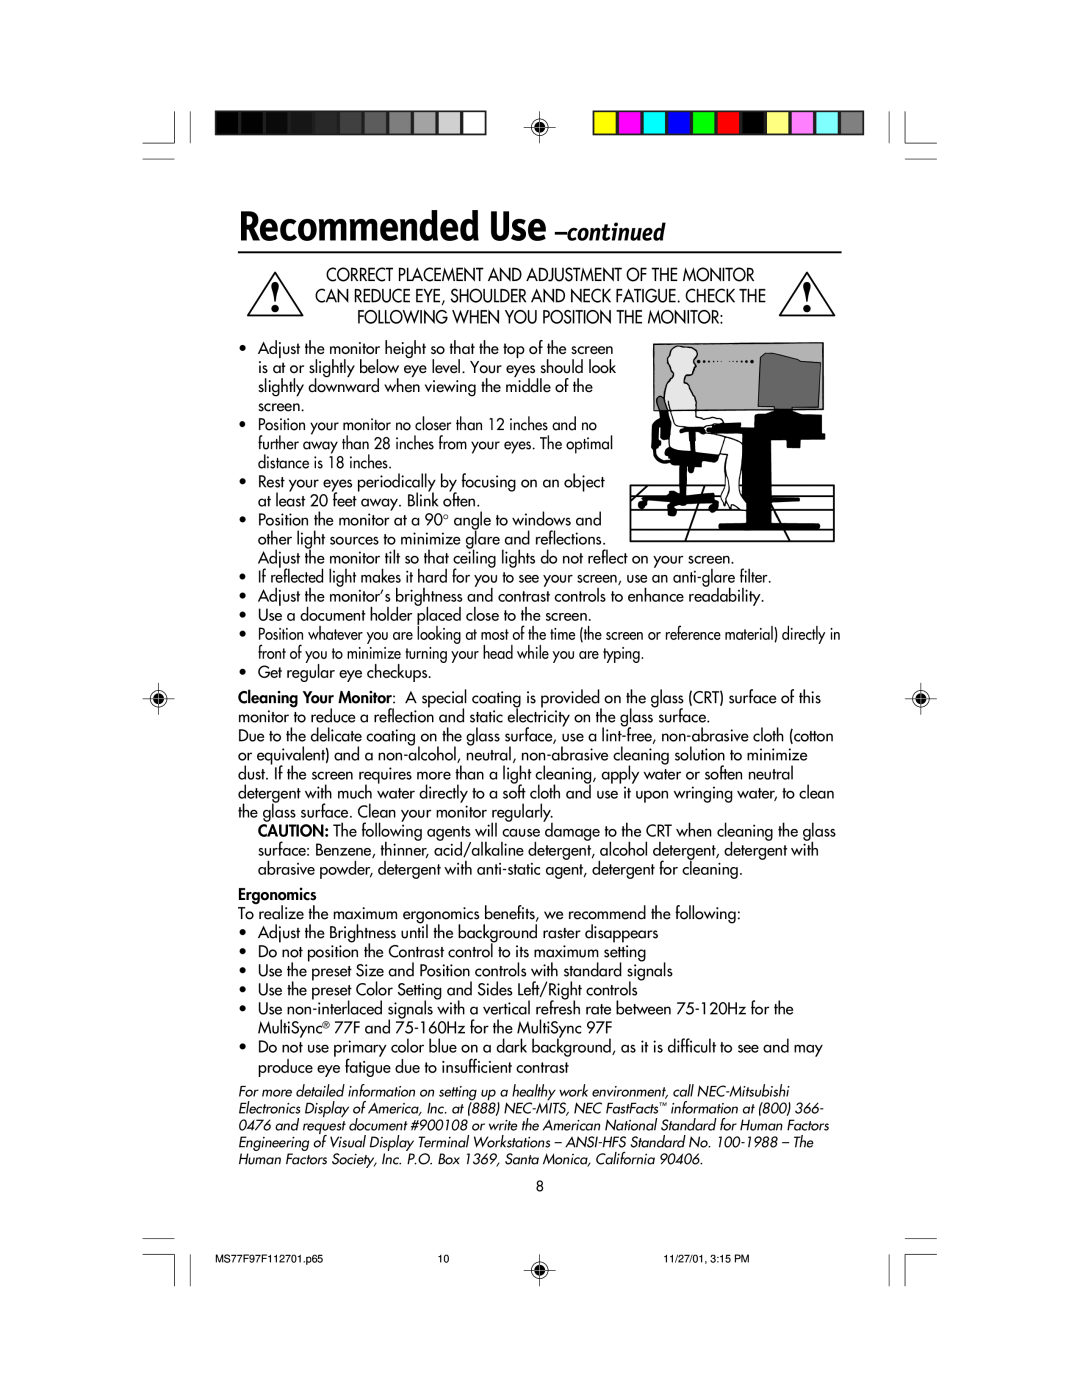 NEC 97F, 77F manual Recommended Use -continued, Correct Placement And Adjustment Of The Monitor 